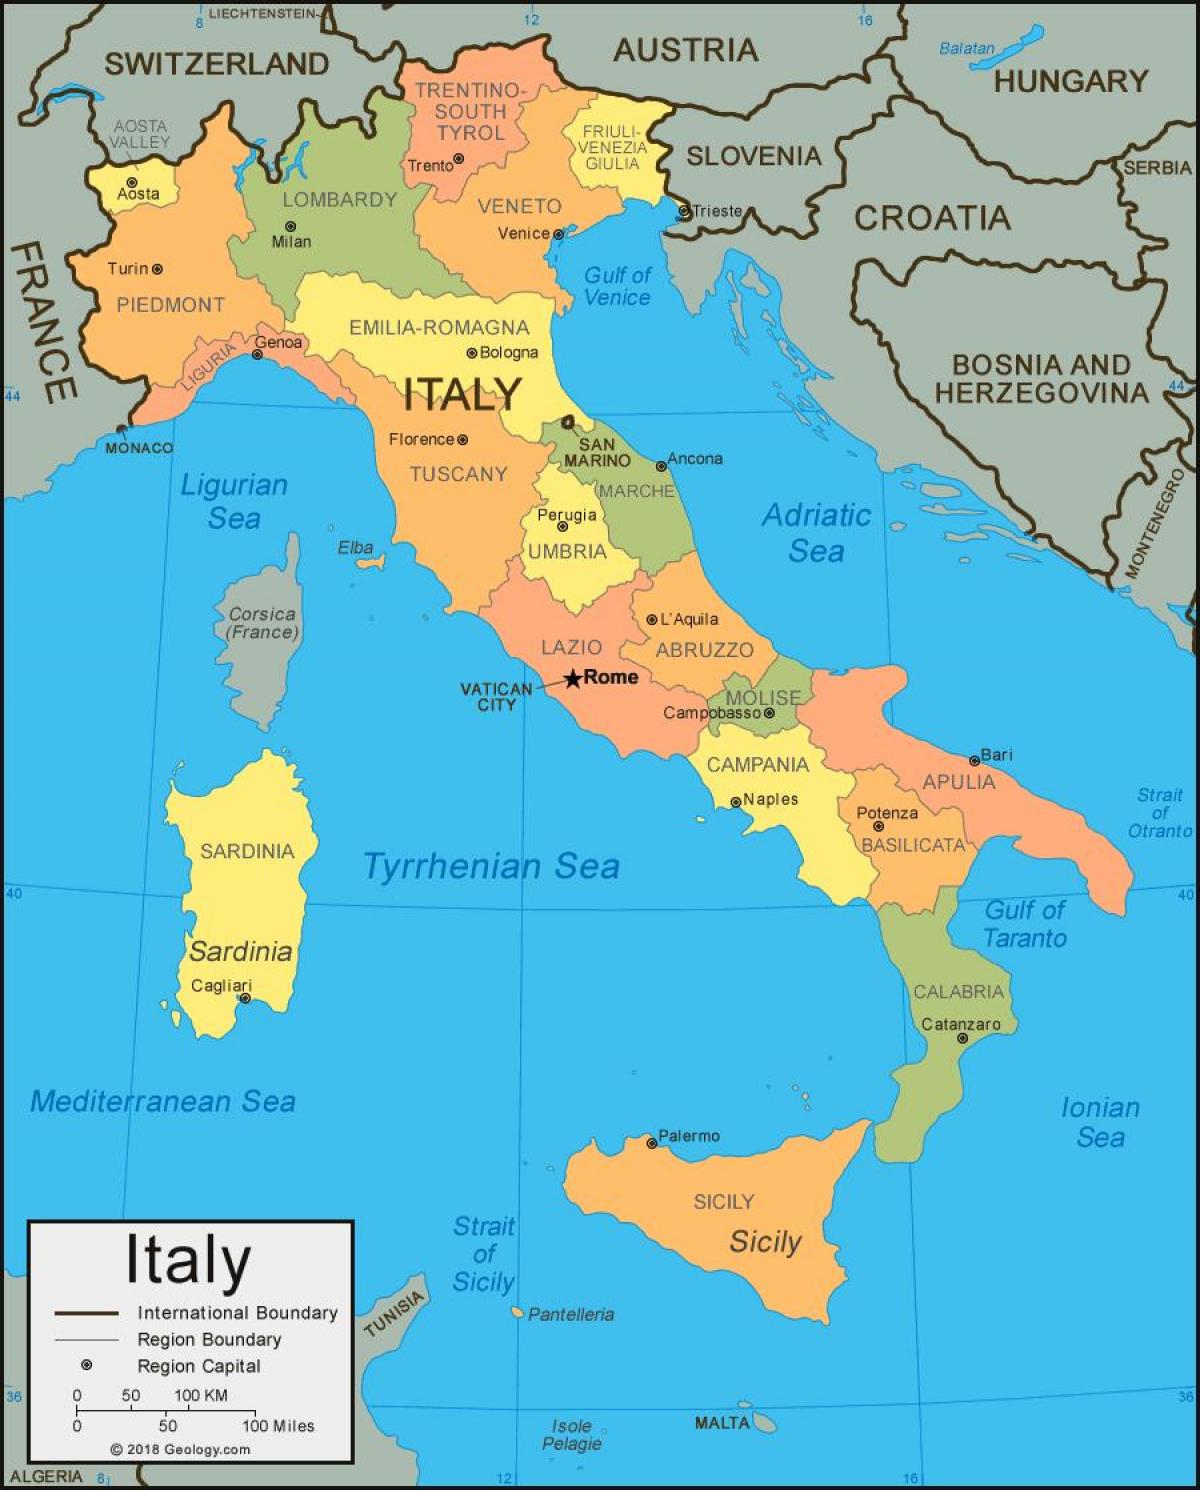 Italy on a map